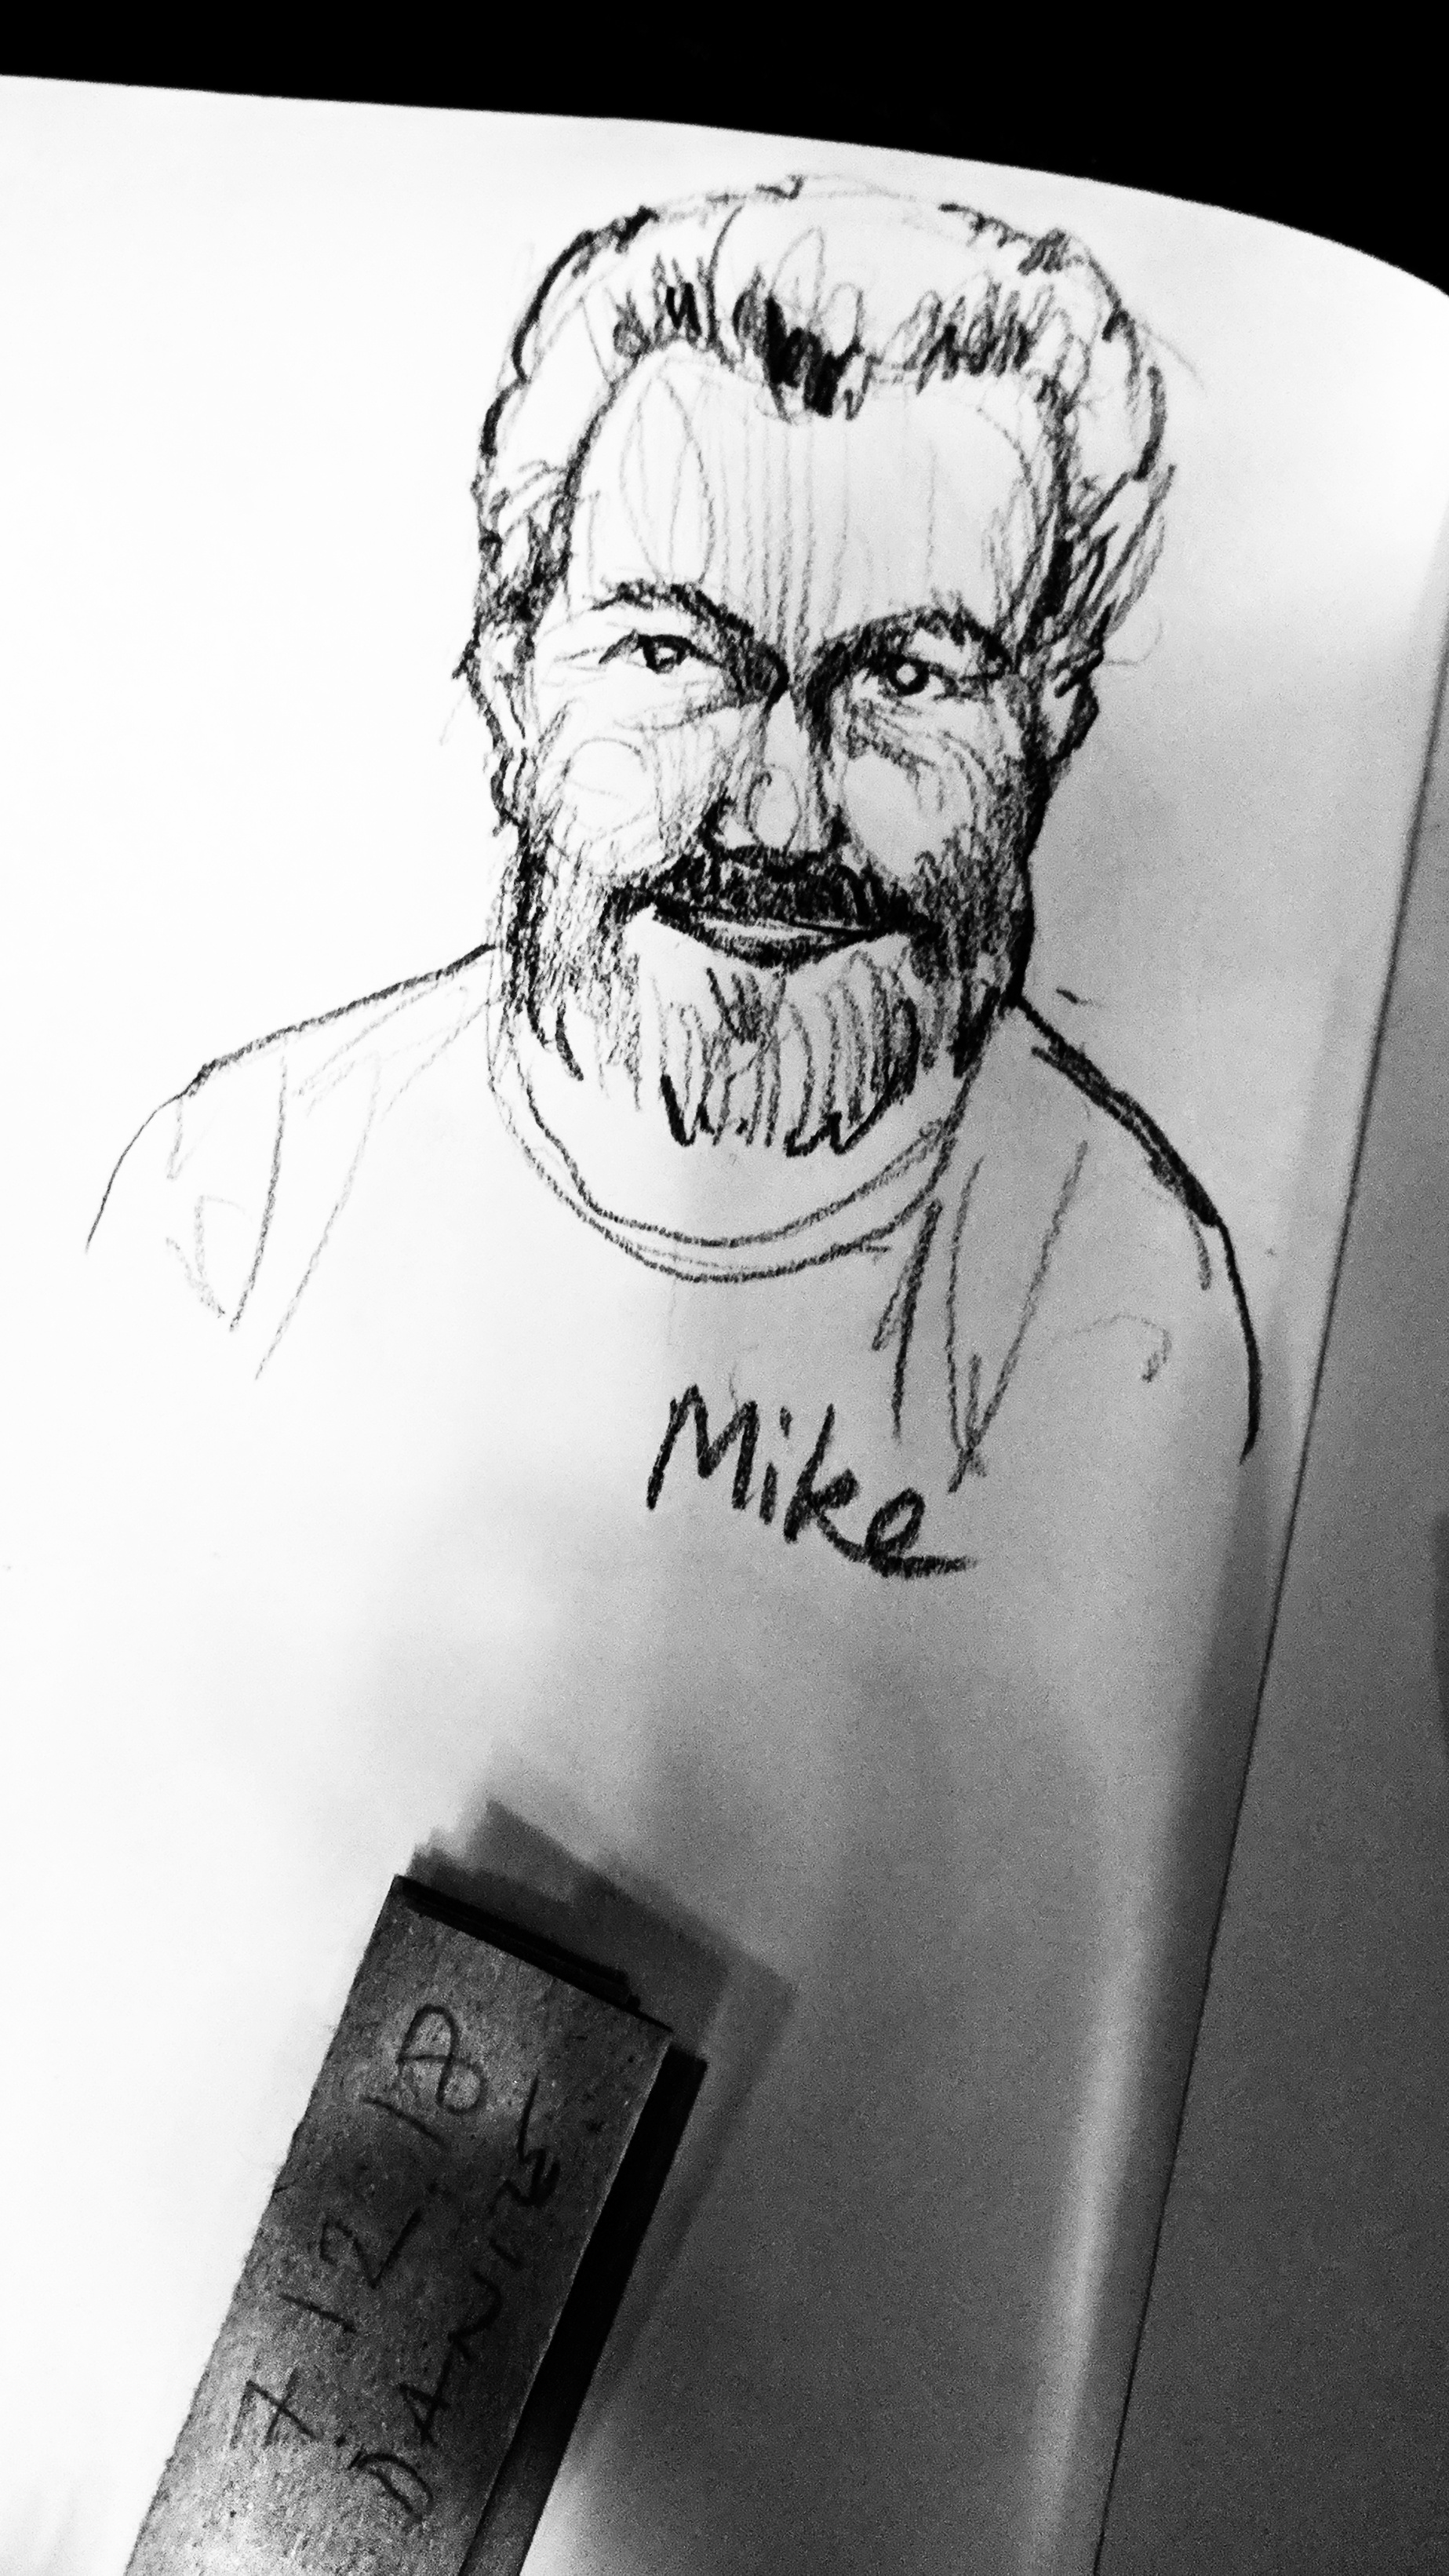 Pencil sketch of Mike